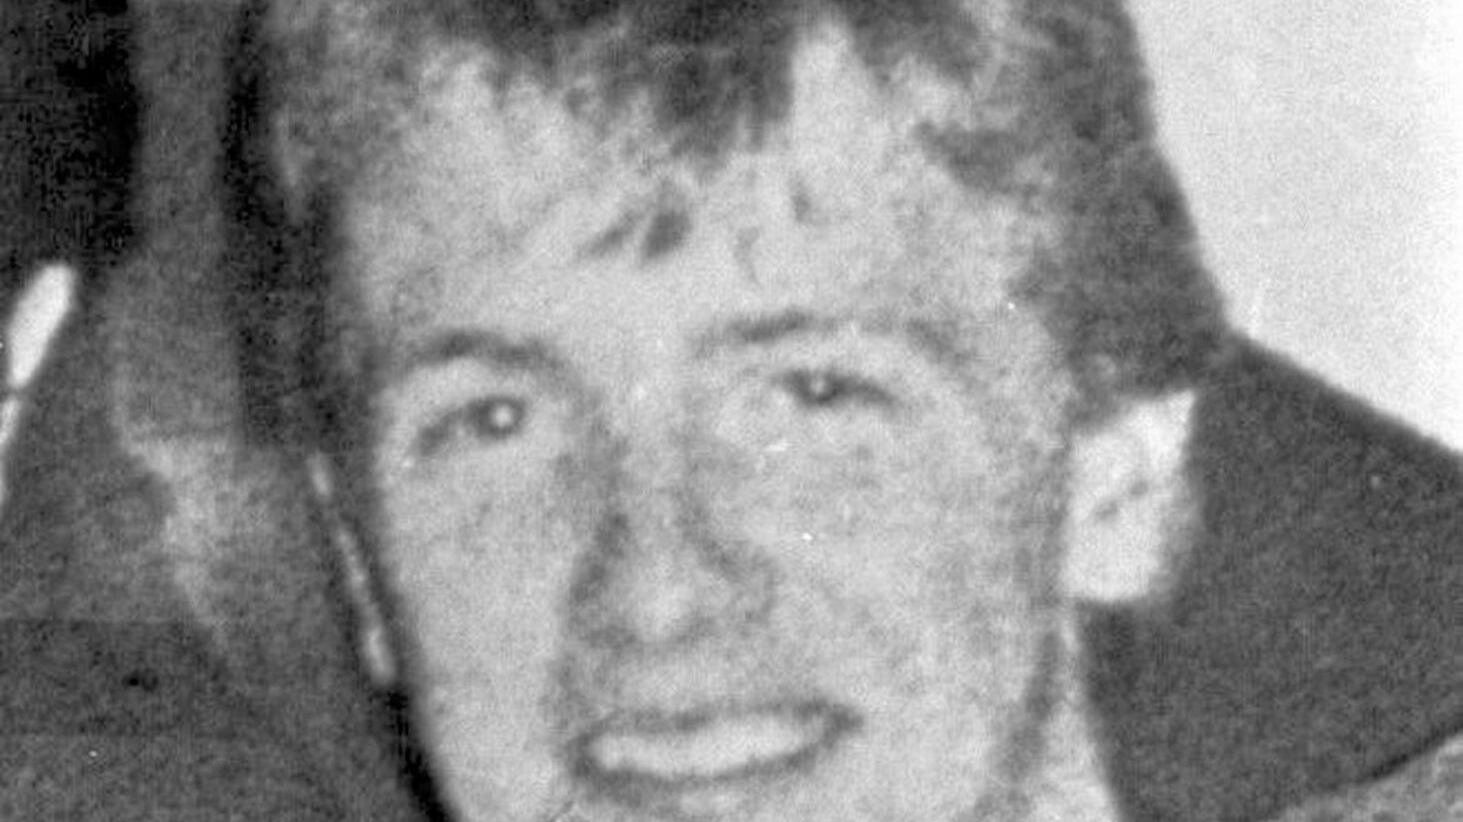 Ian Sproule (24) was shot dead by the IRA outside his family home in Castlederg in 1991 